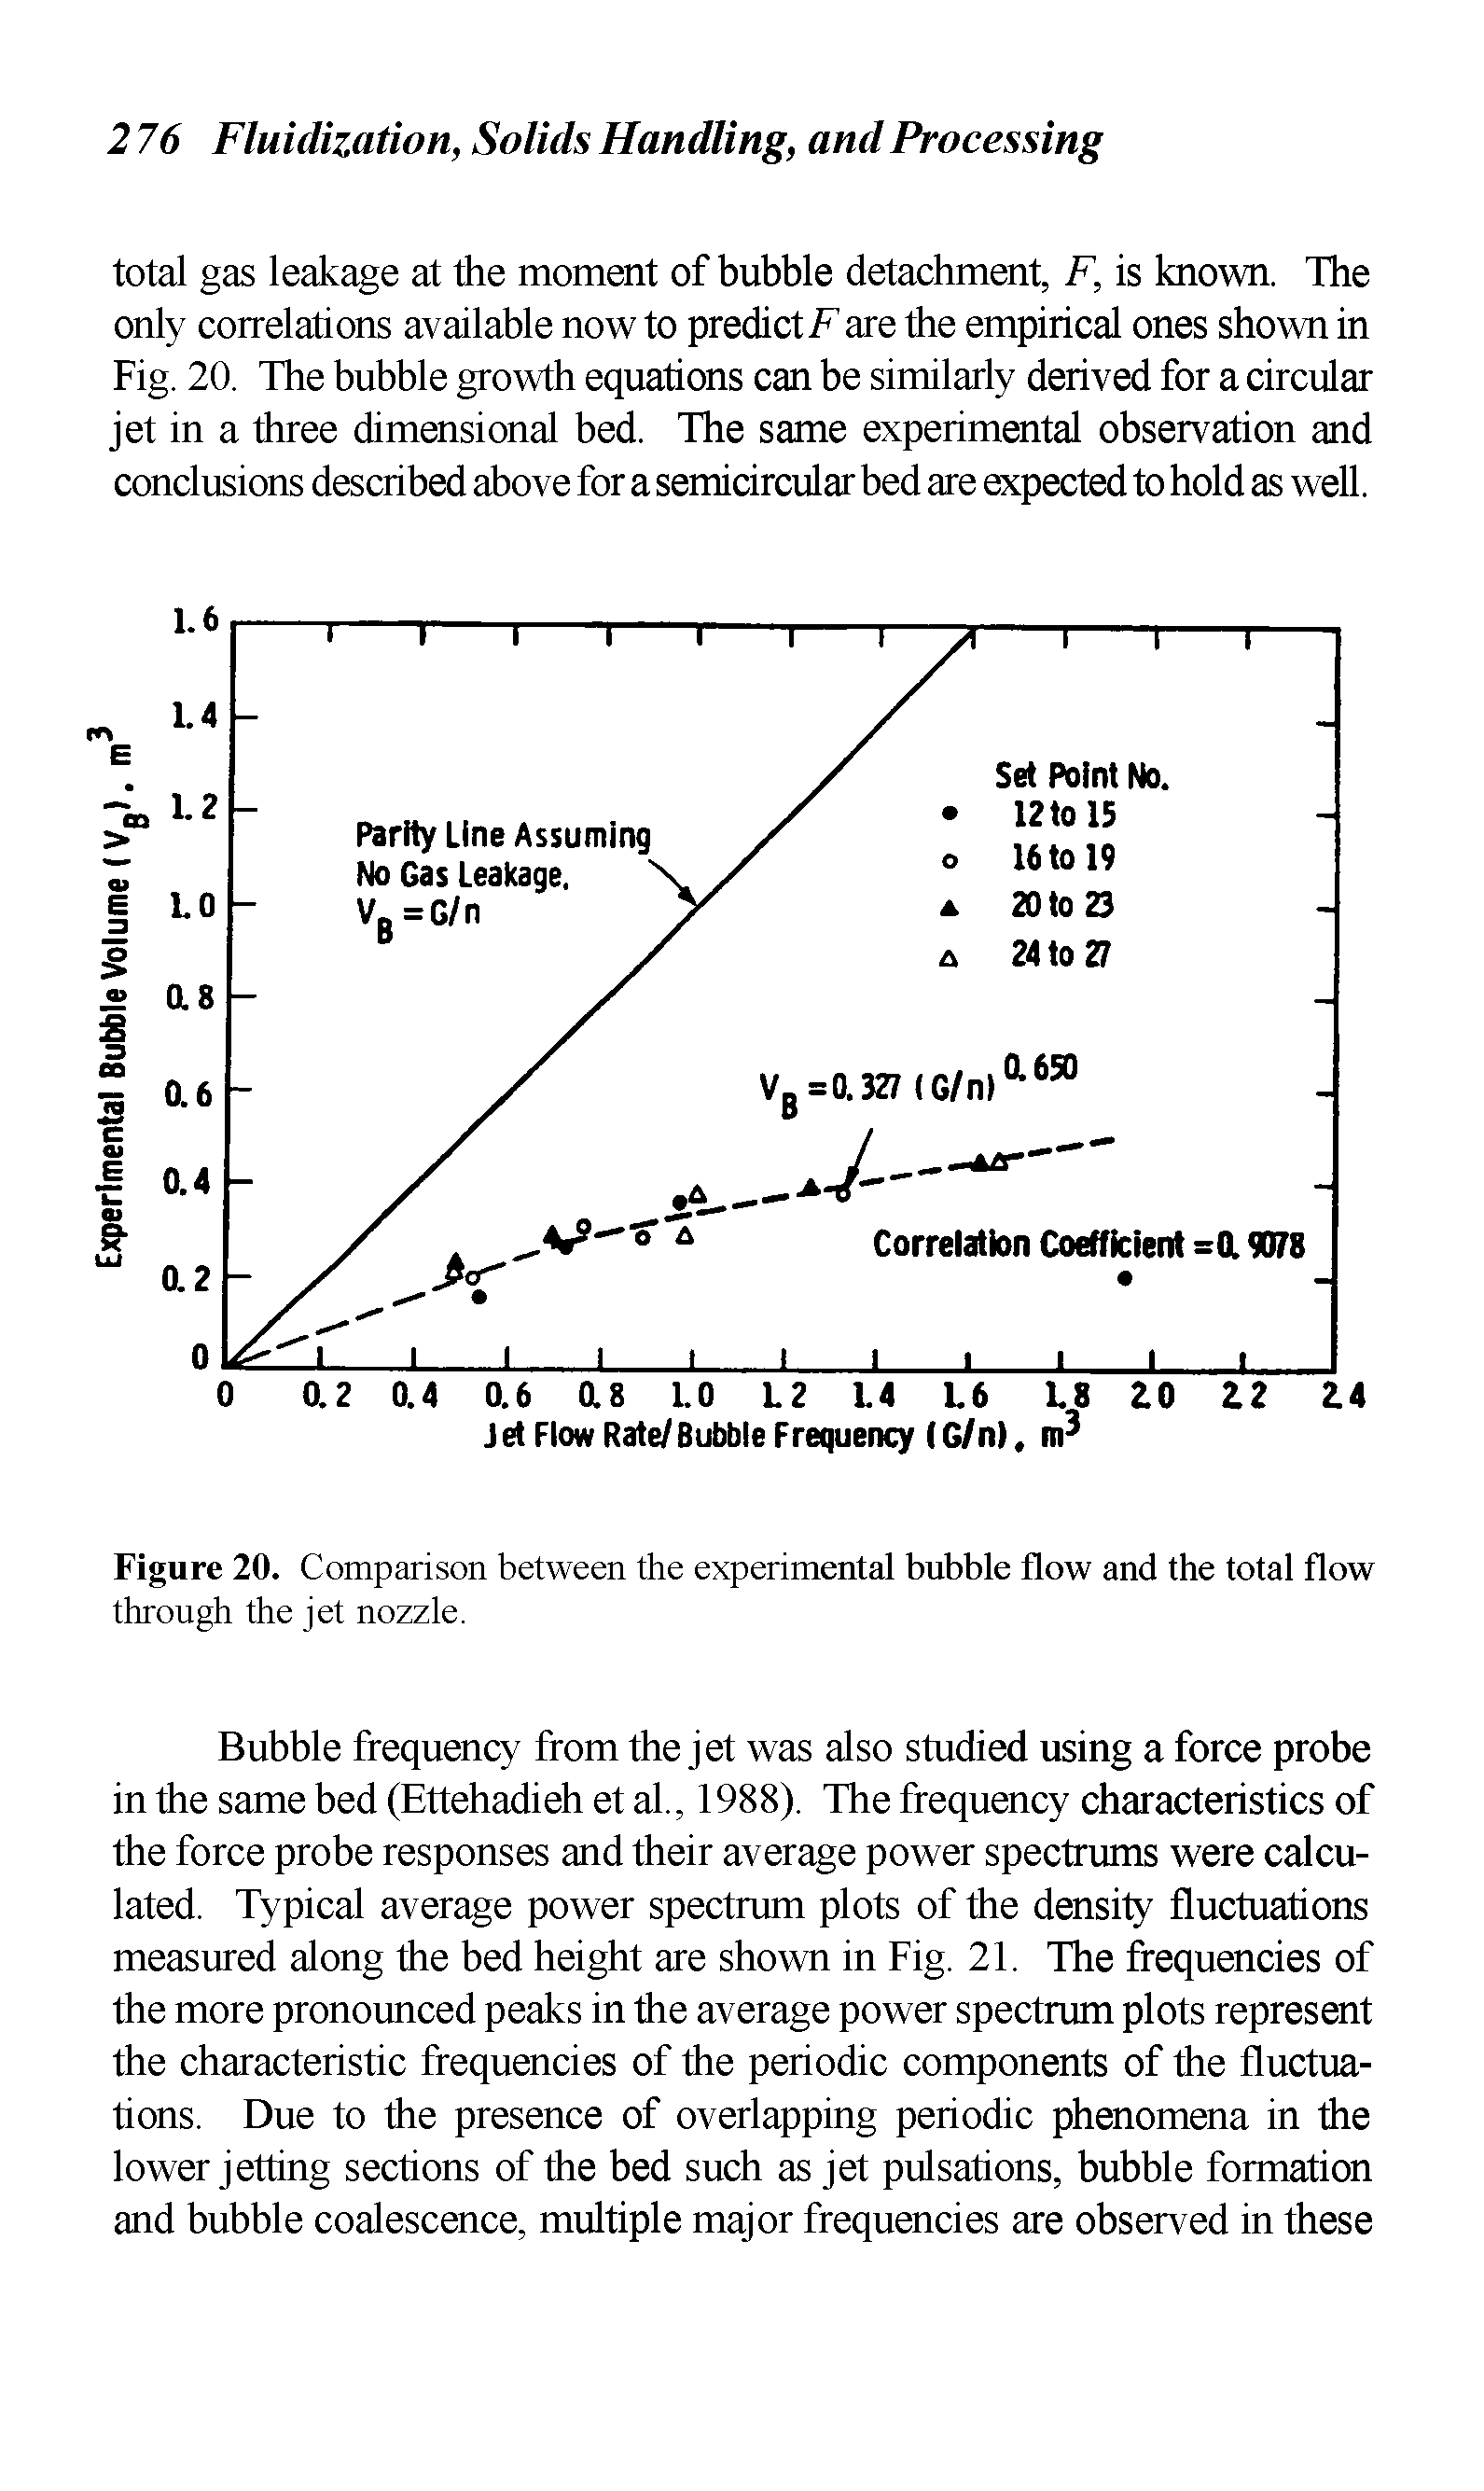 Figure 20. Comparison between the experimental bubble flow and the total flow through the jet nozzle.